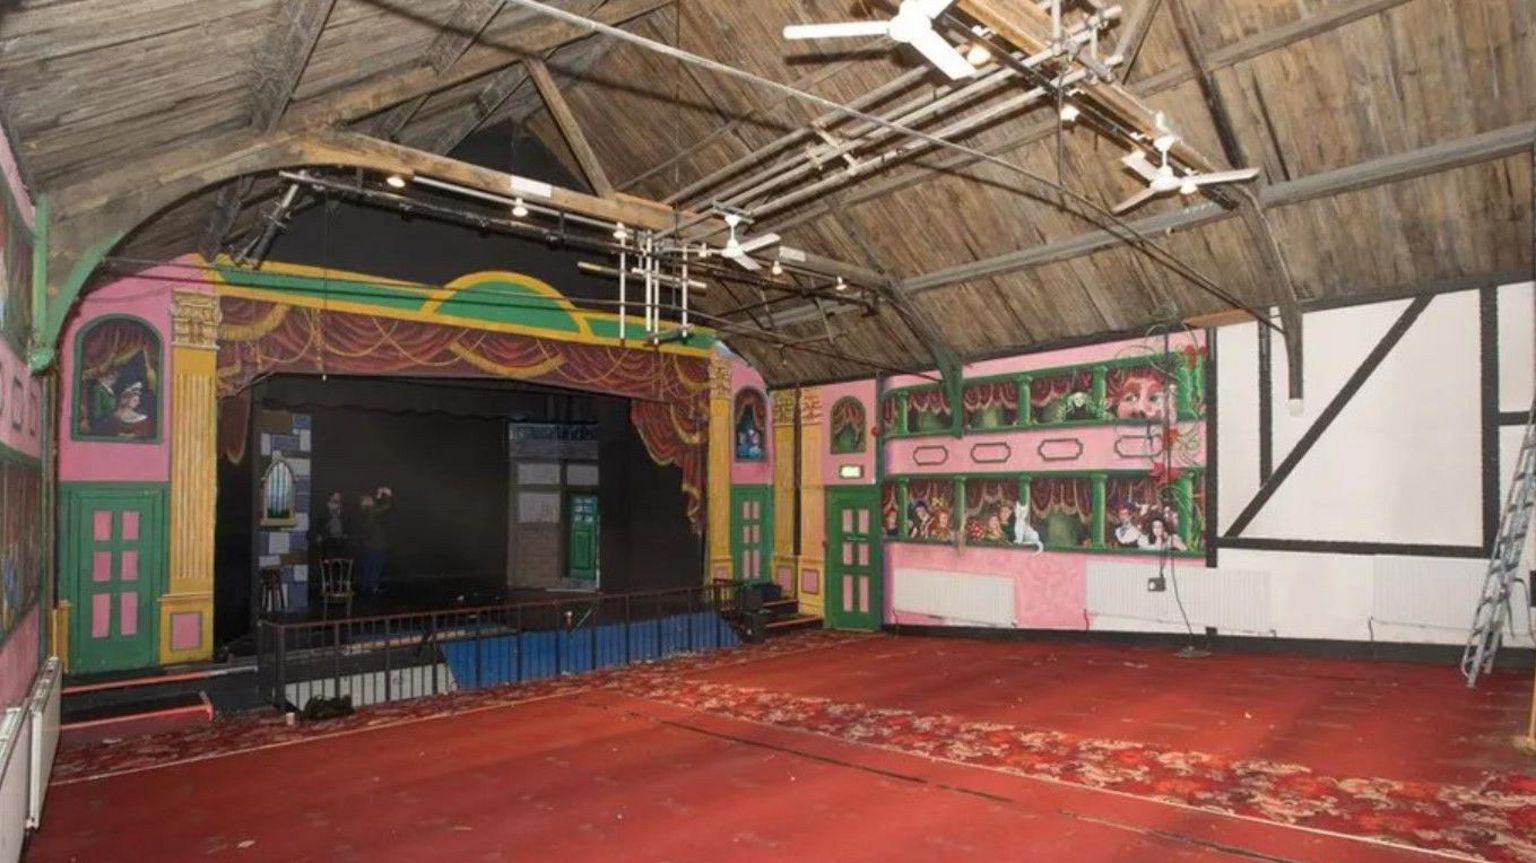 Interior of a theatre with a brick carpet and a black stage area with a wooden vaulted ceiling